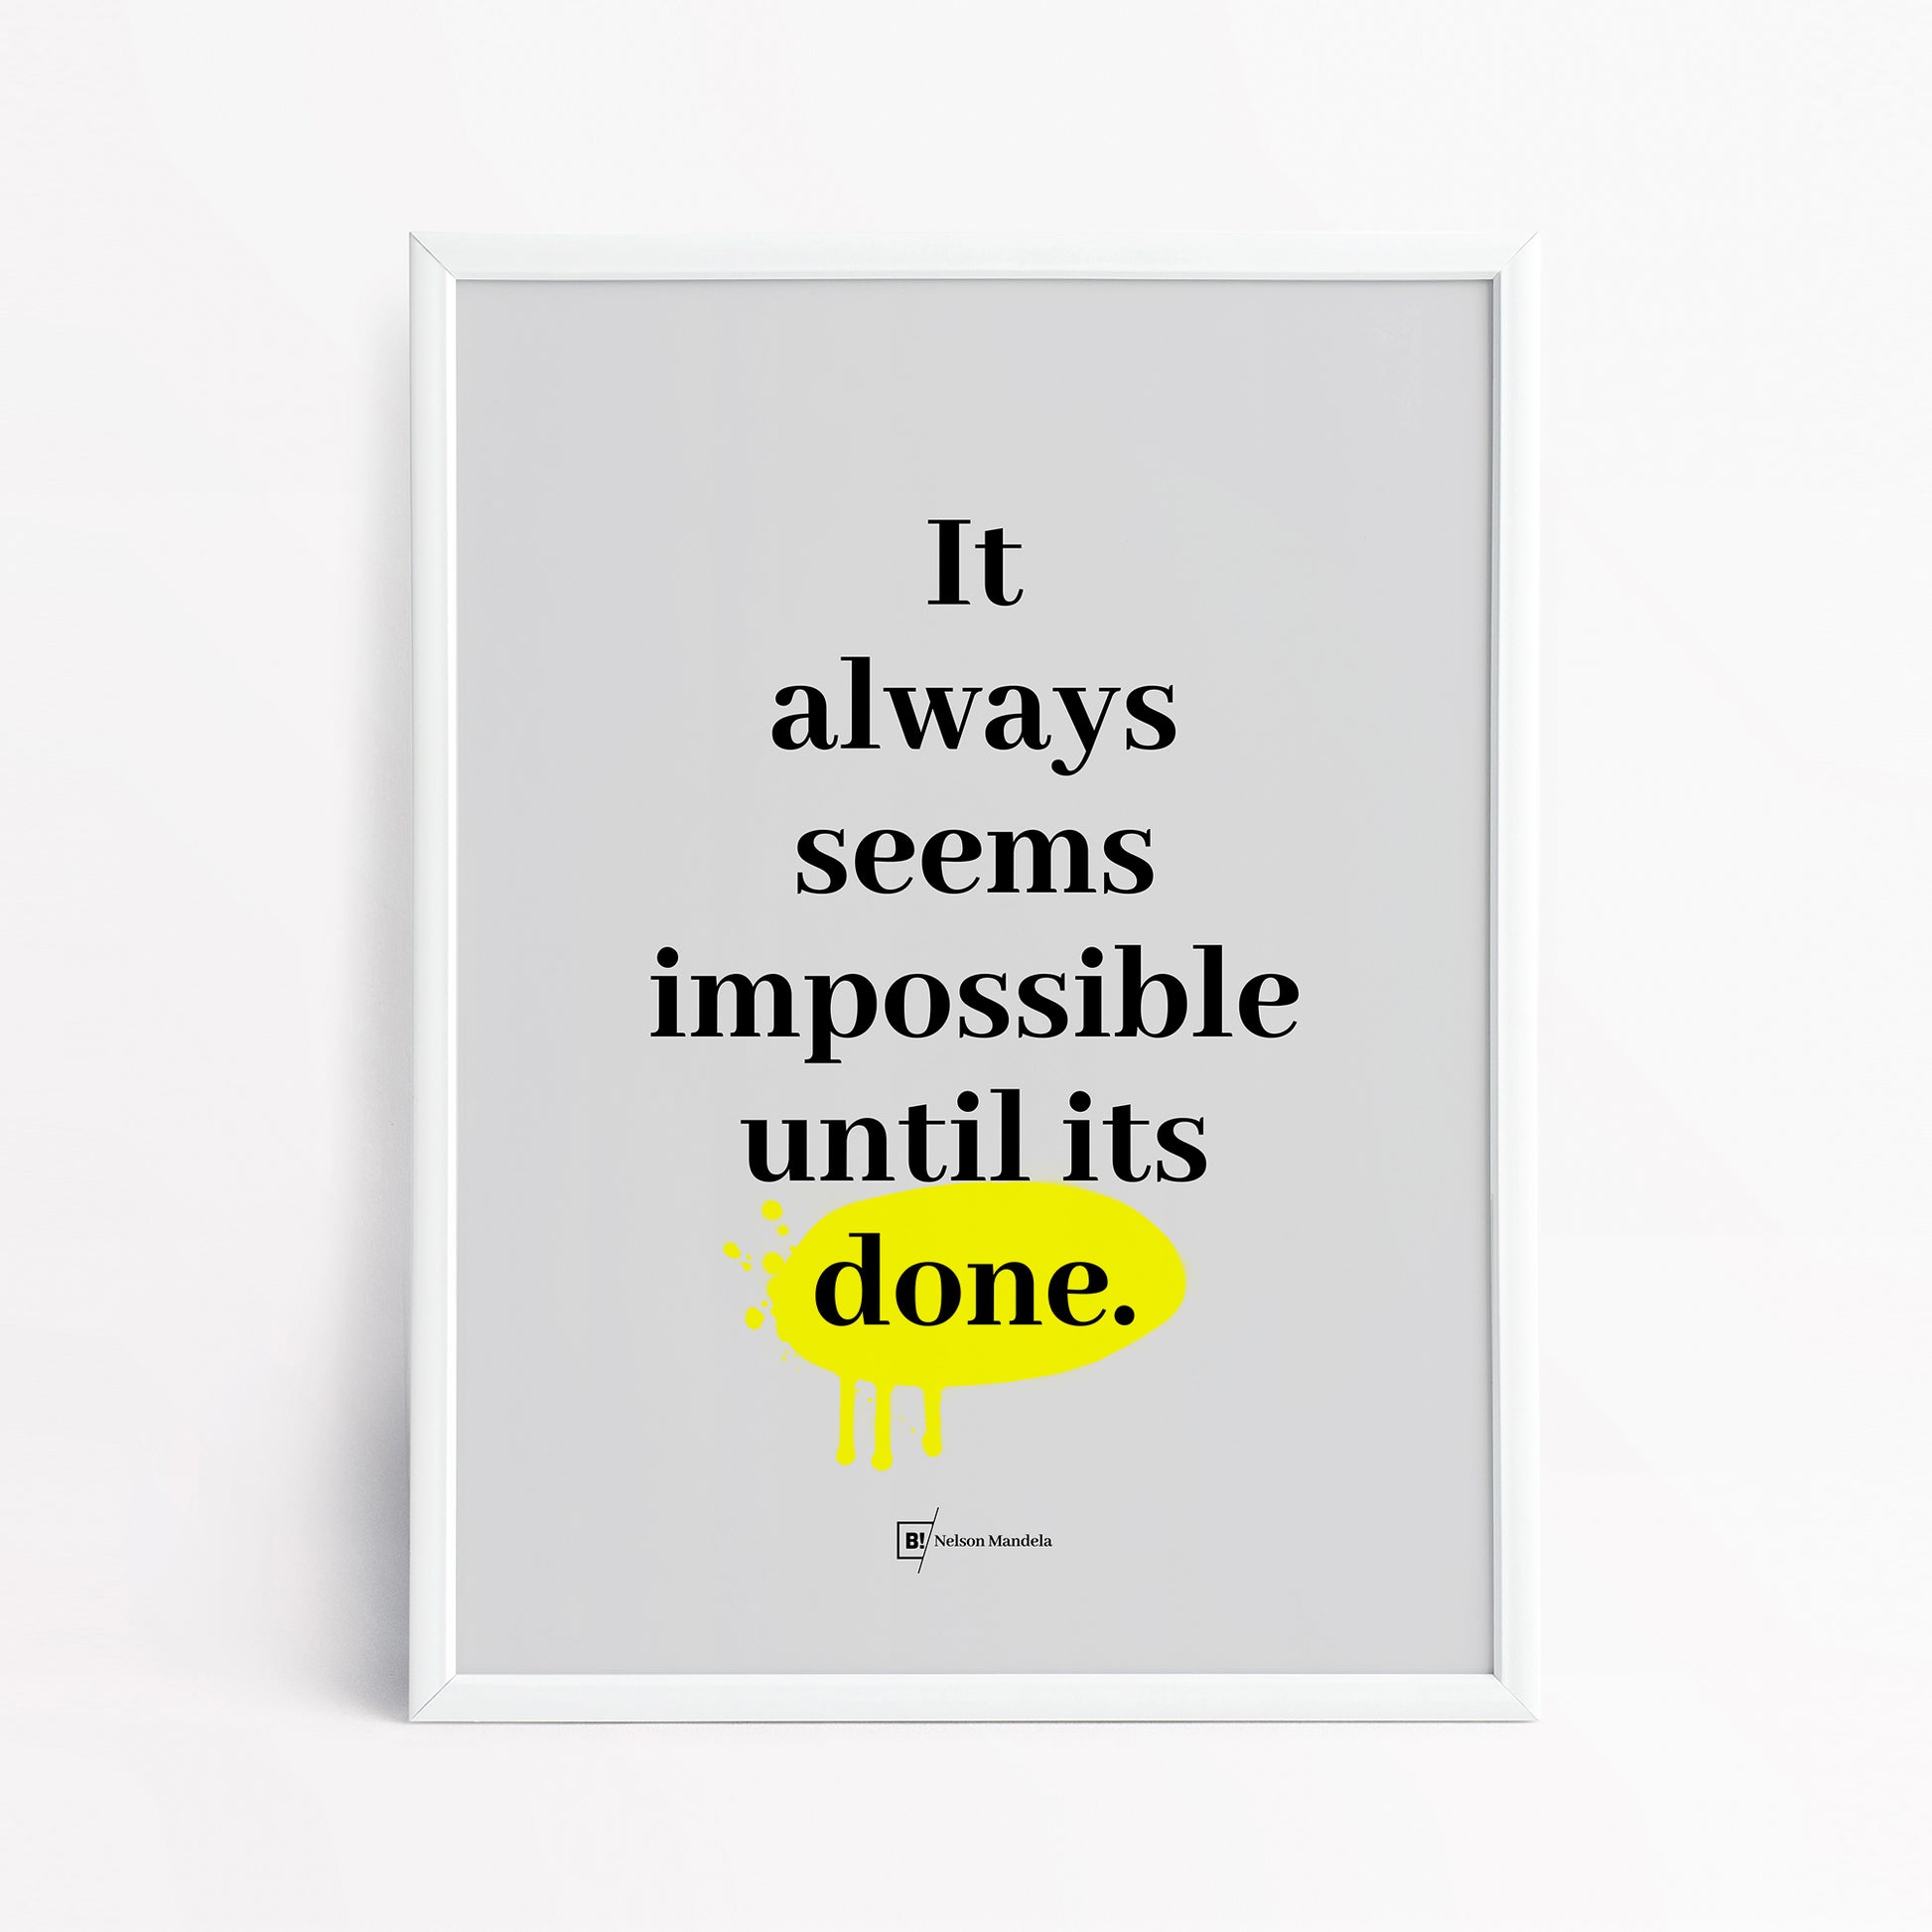 Be inspired by Nelson Mandela's famous "It always seems impossible until its done" quote art print. This artwork was printed using the giclée process on archival acid-free paper and is presented in a simple white frame that captures its timeless beauty in every detail.